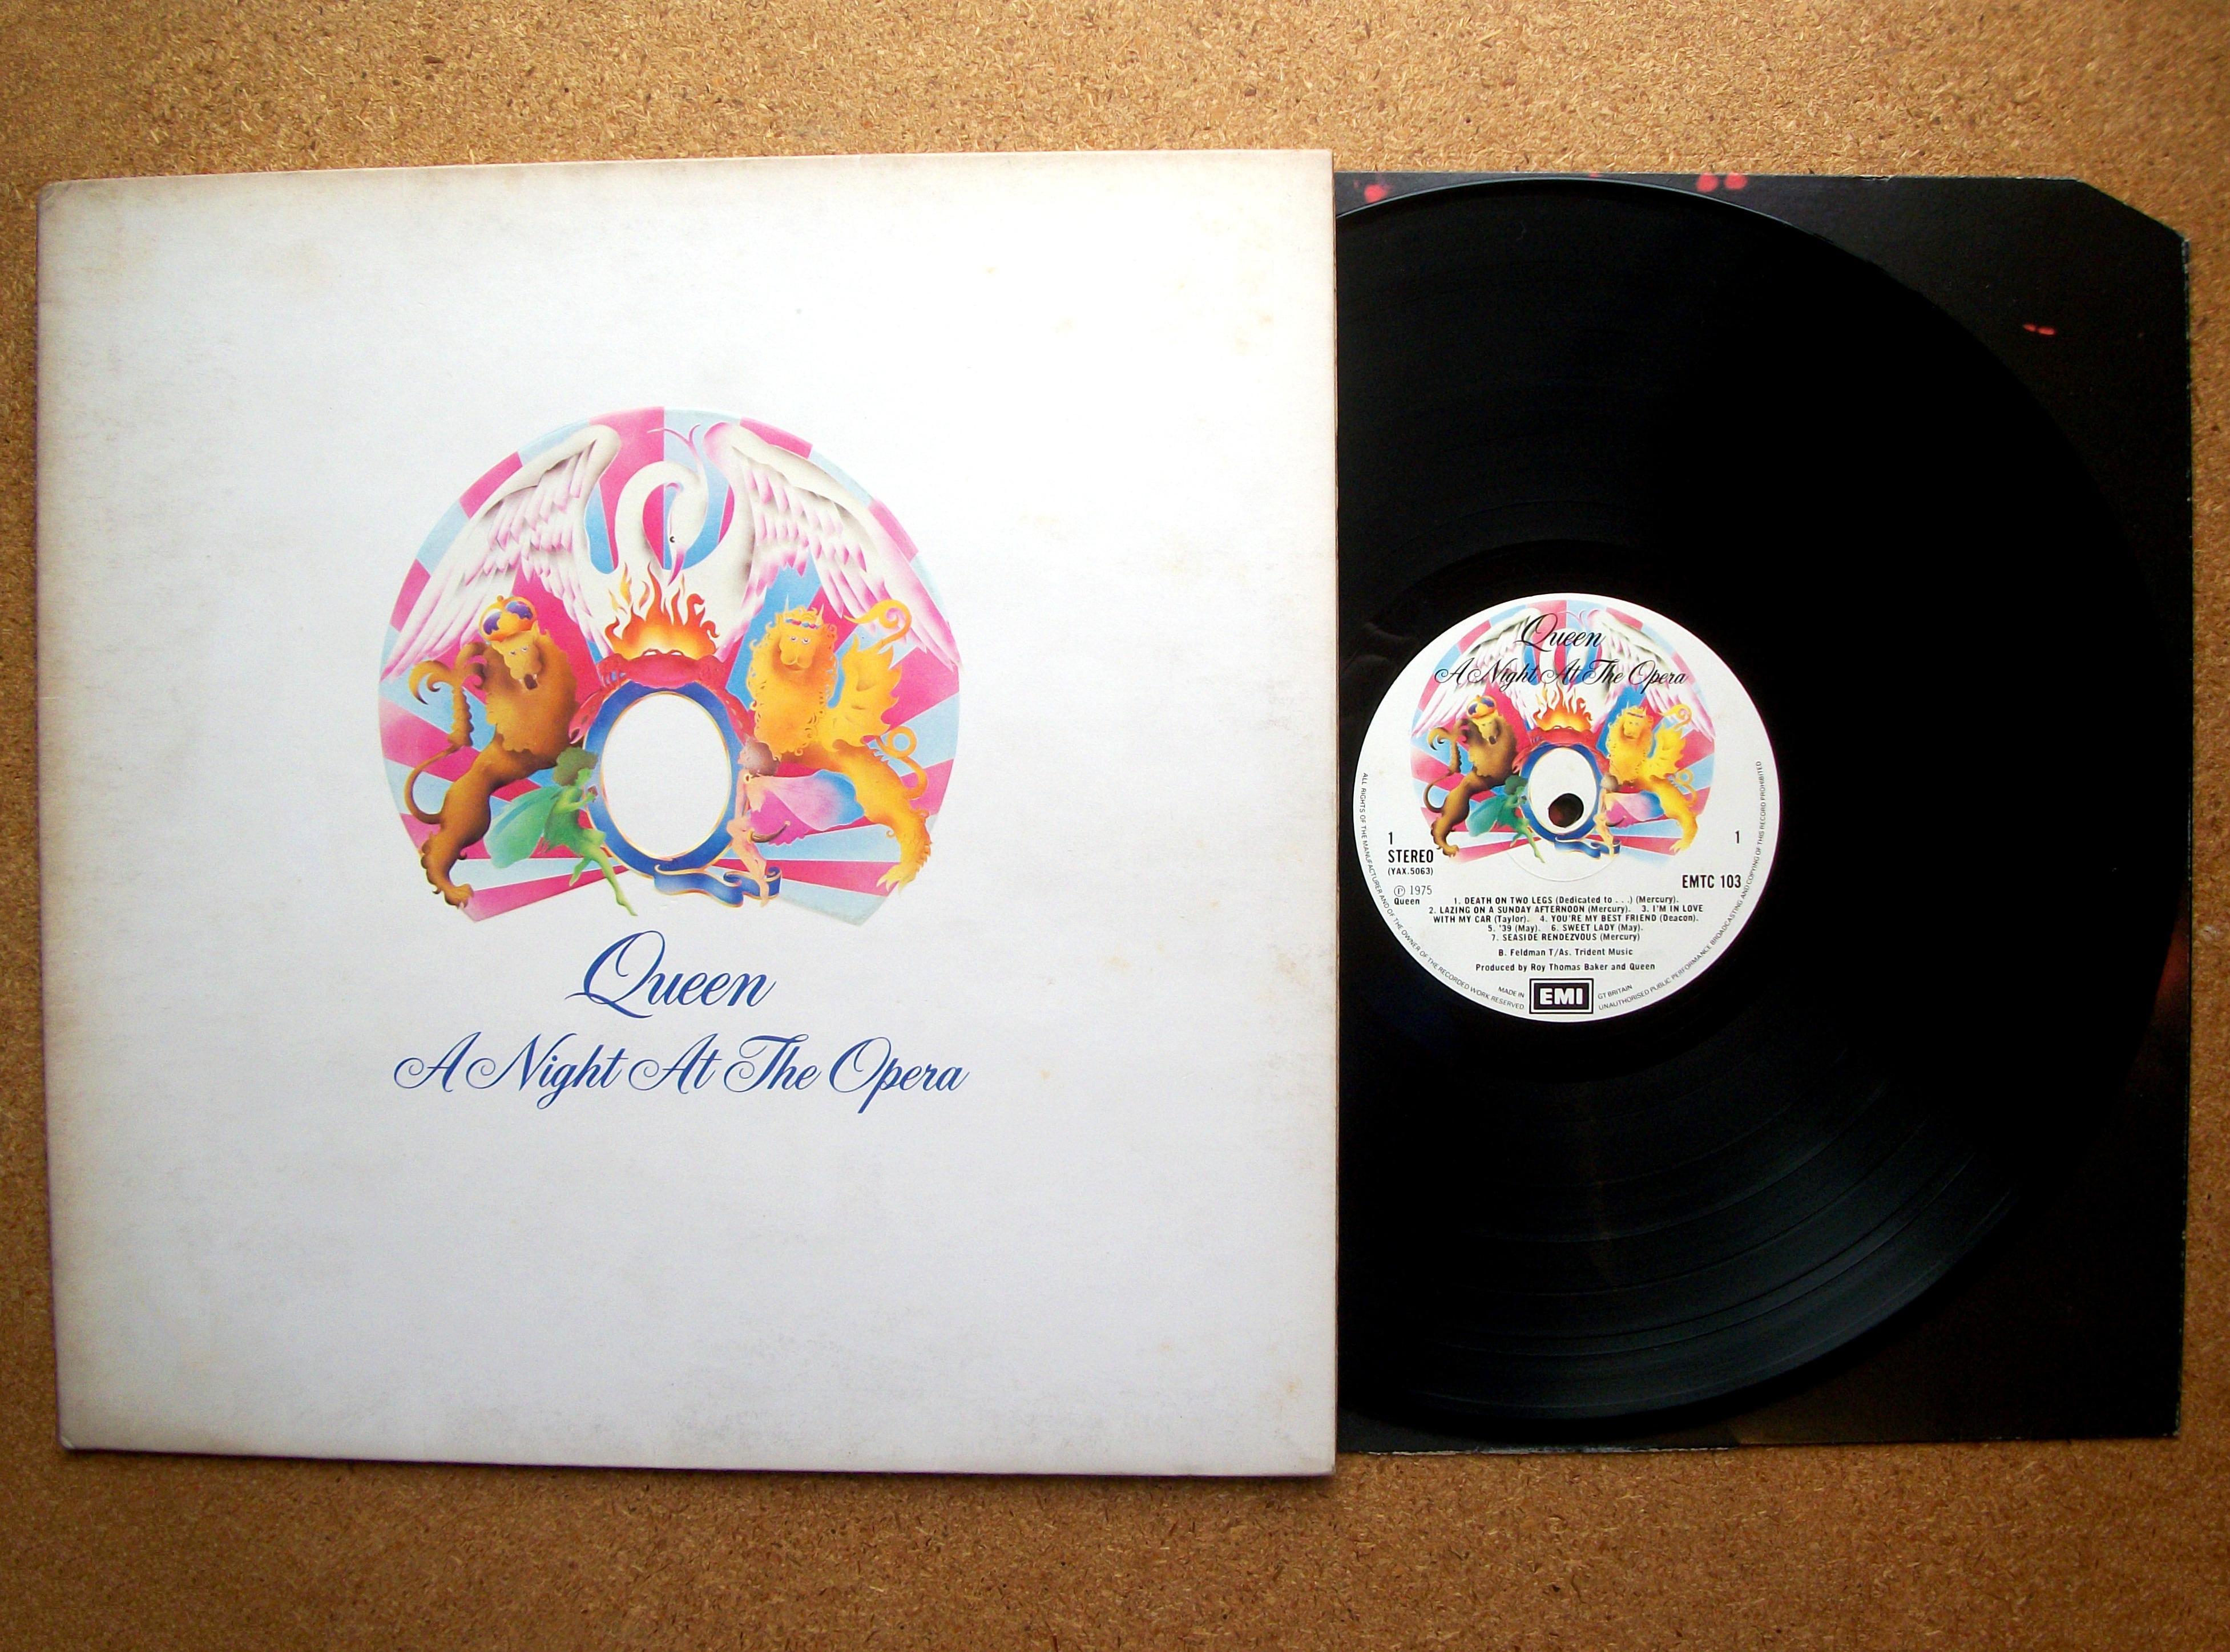 39, lyrics by Brian May, Produced by Queen and Roy